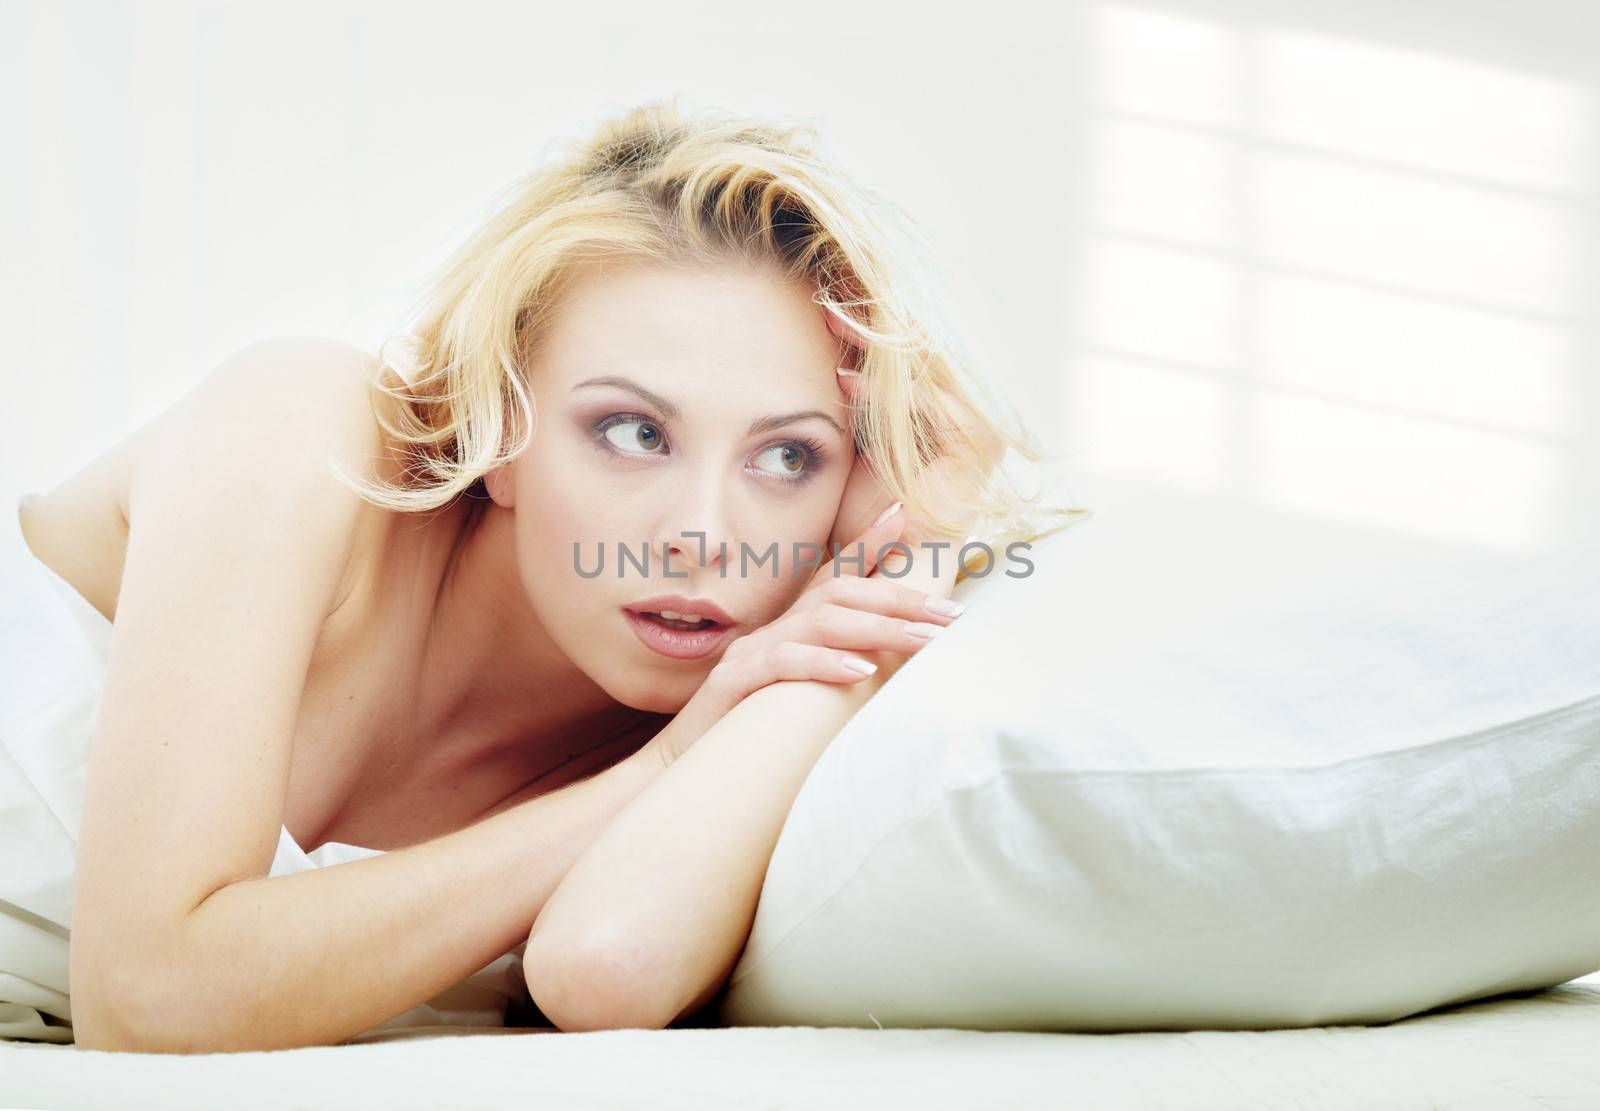 Young blond lady laying in a bedroom with shadows on the wall from the window